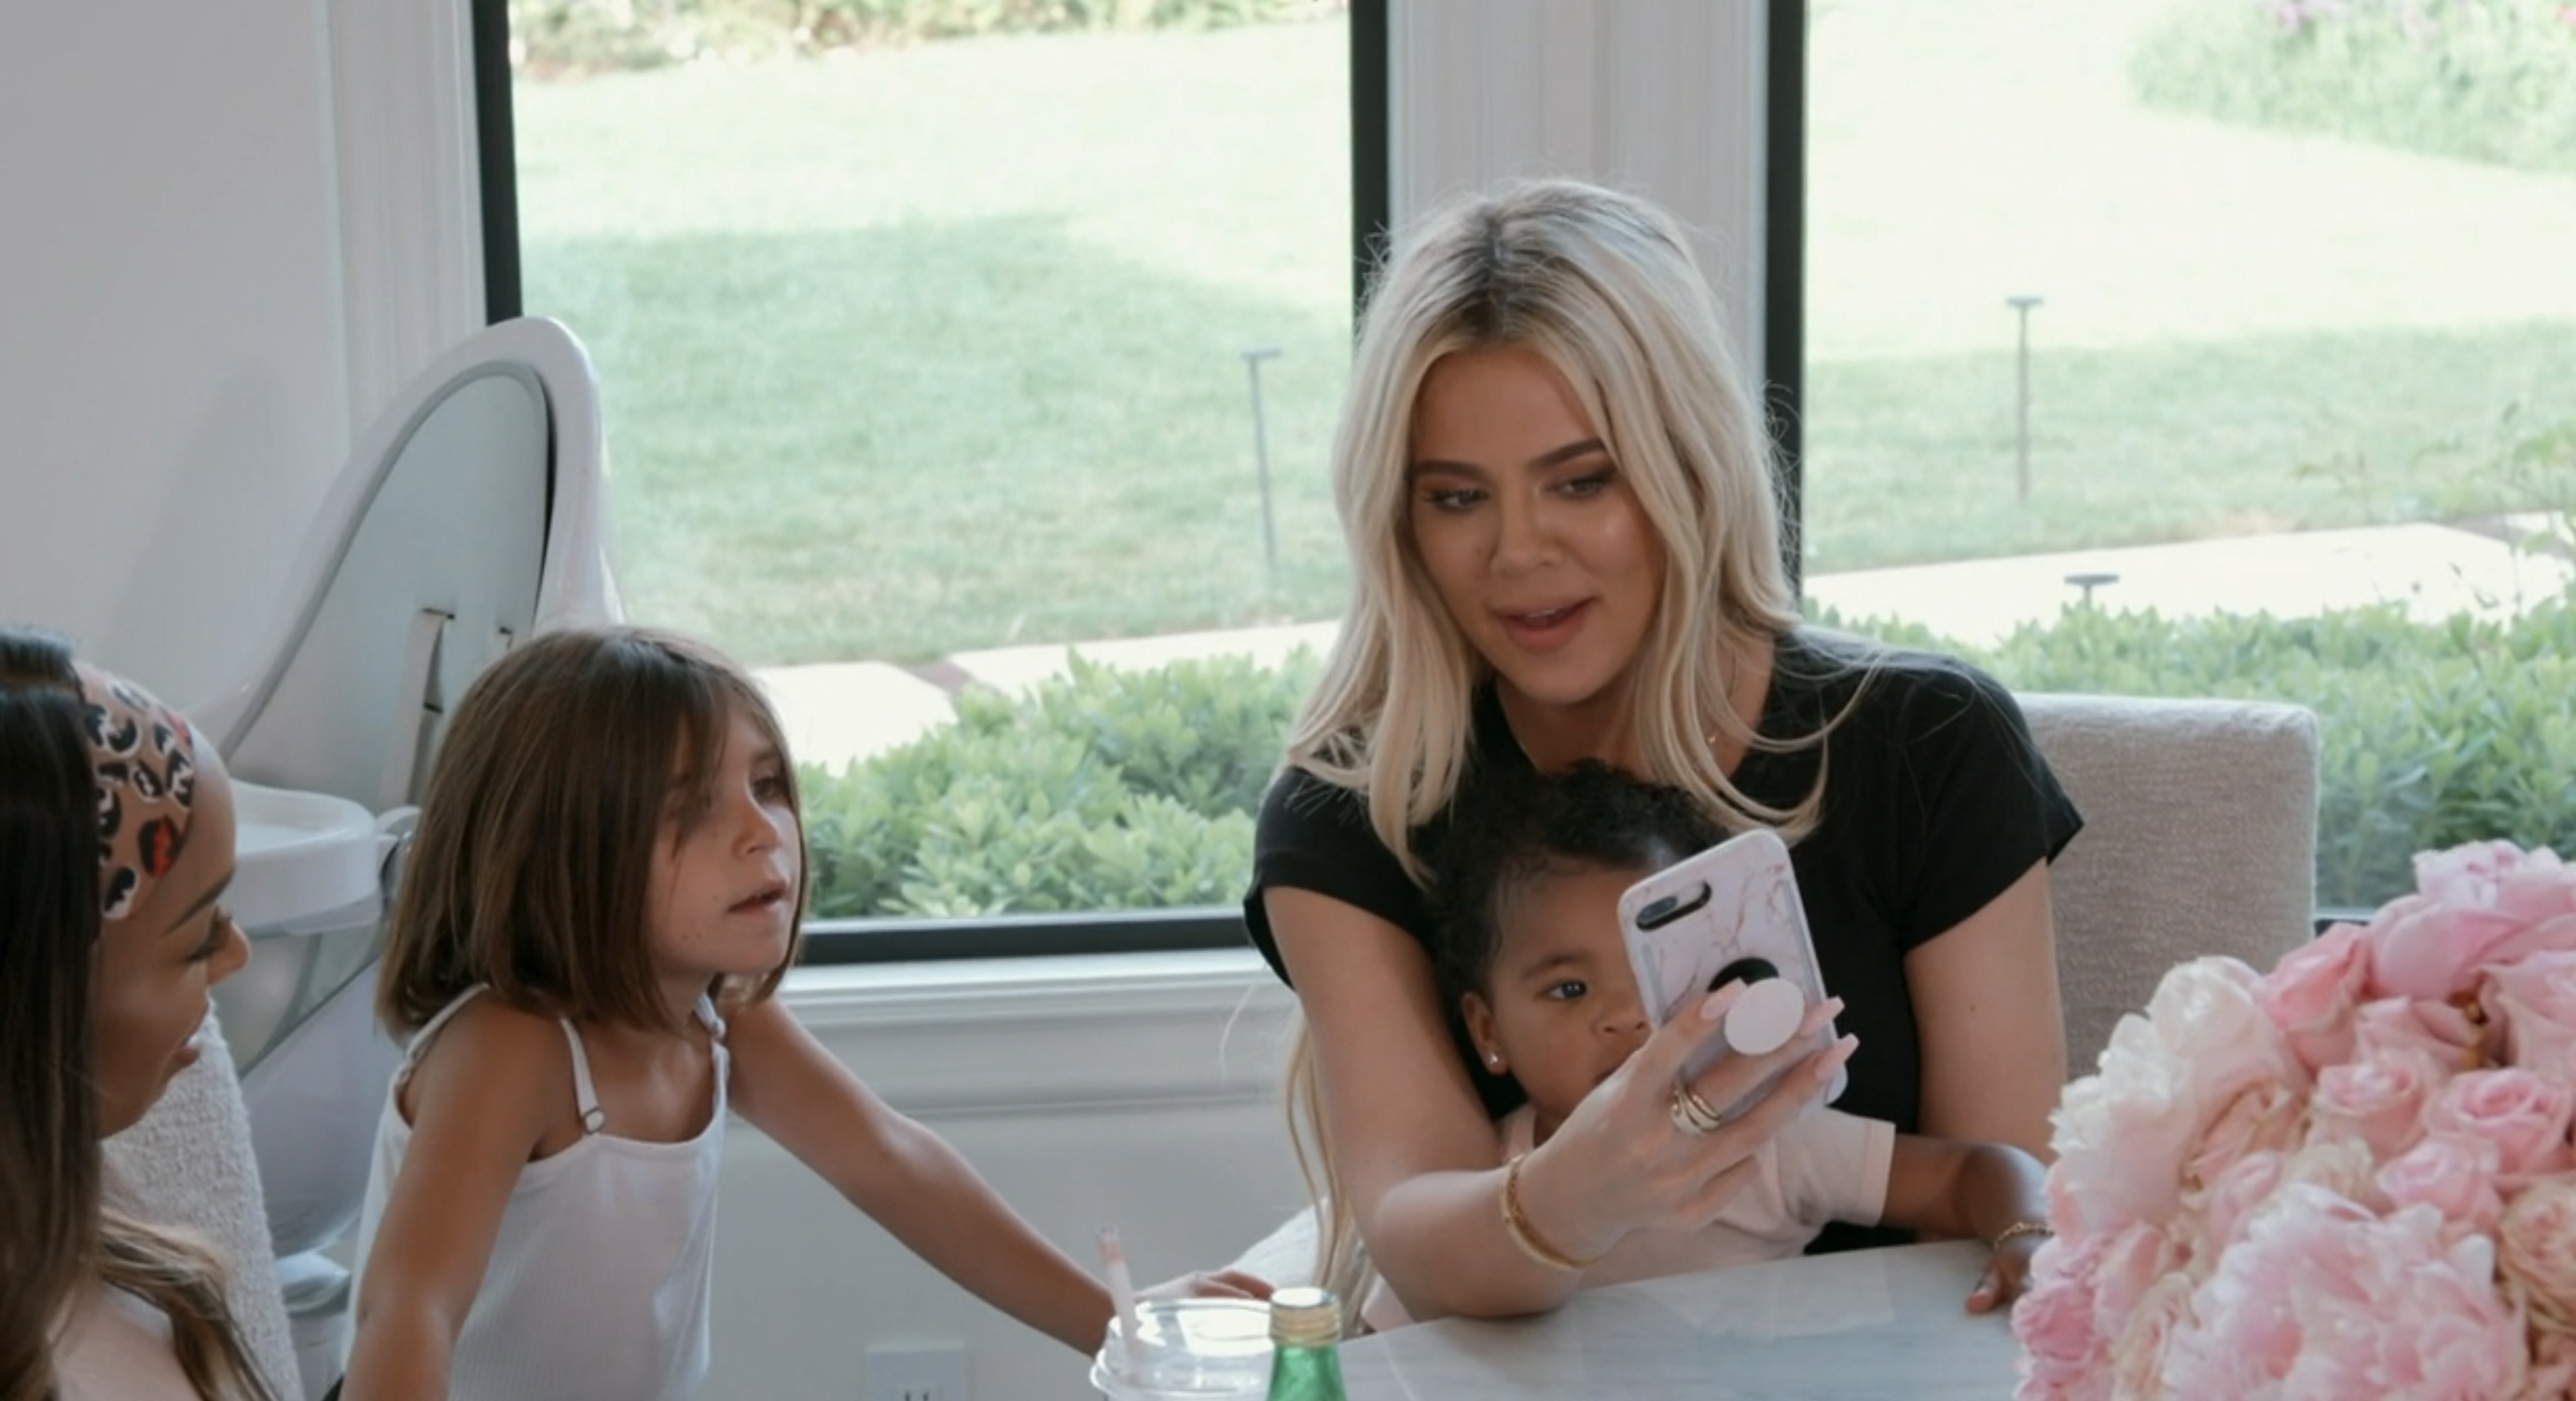 Khloé with Malika and children looking at a phone